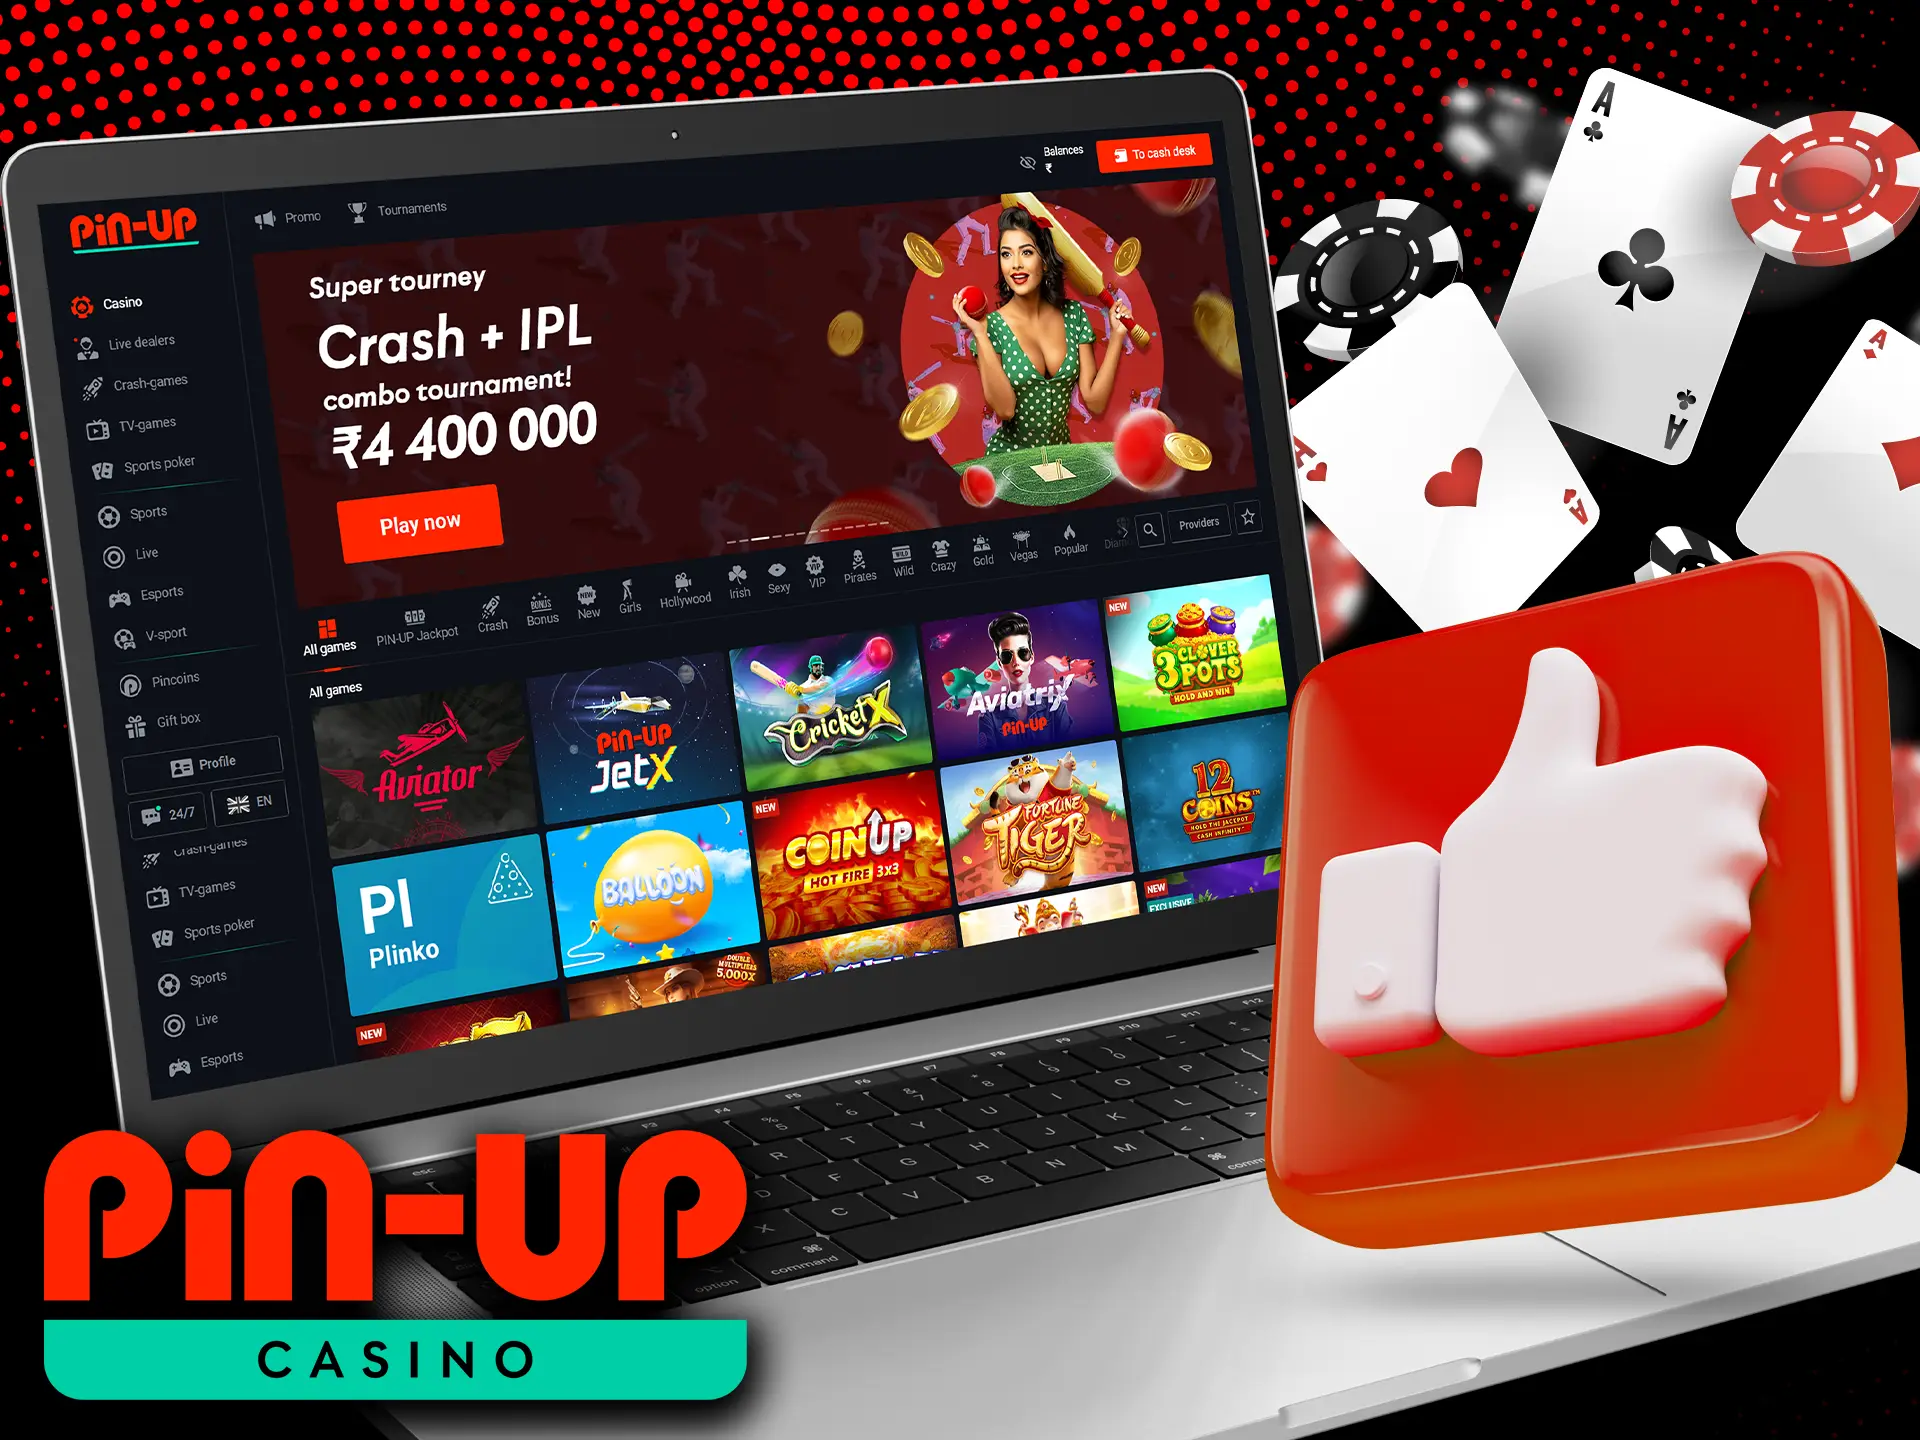 Pin-Up offers many payment options and other features for players from India.